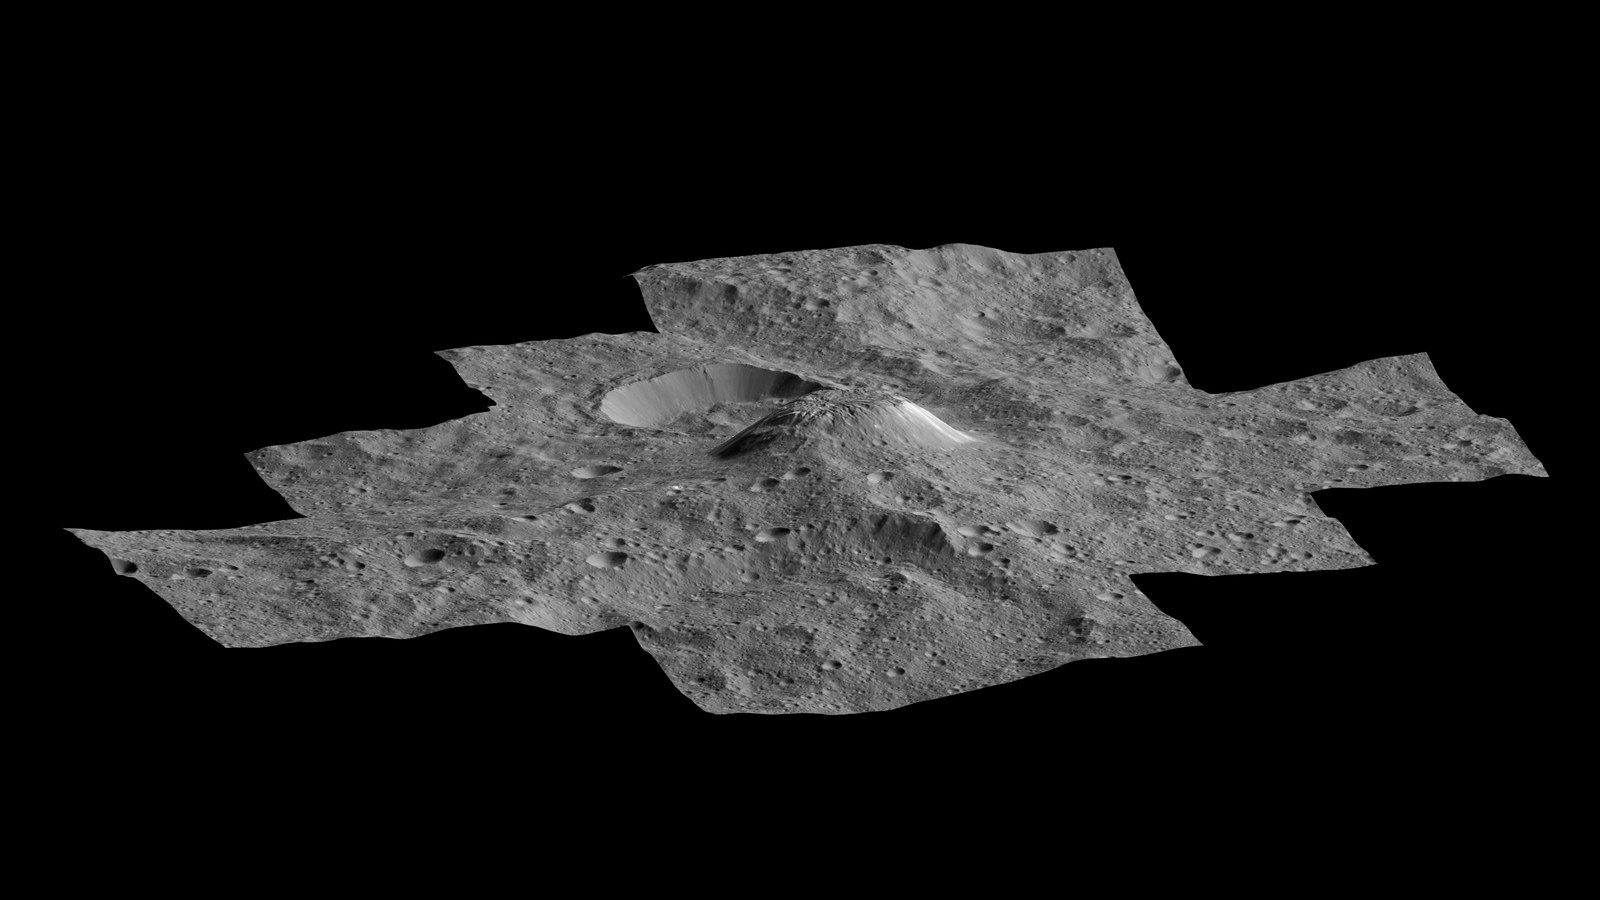 Ahuna Mons on Ceres